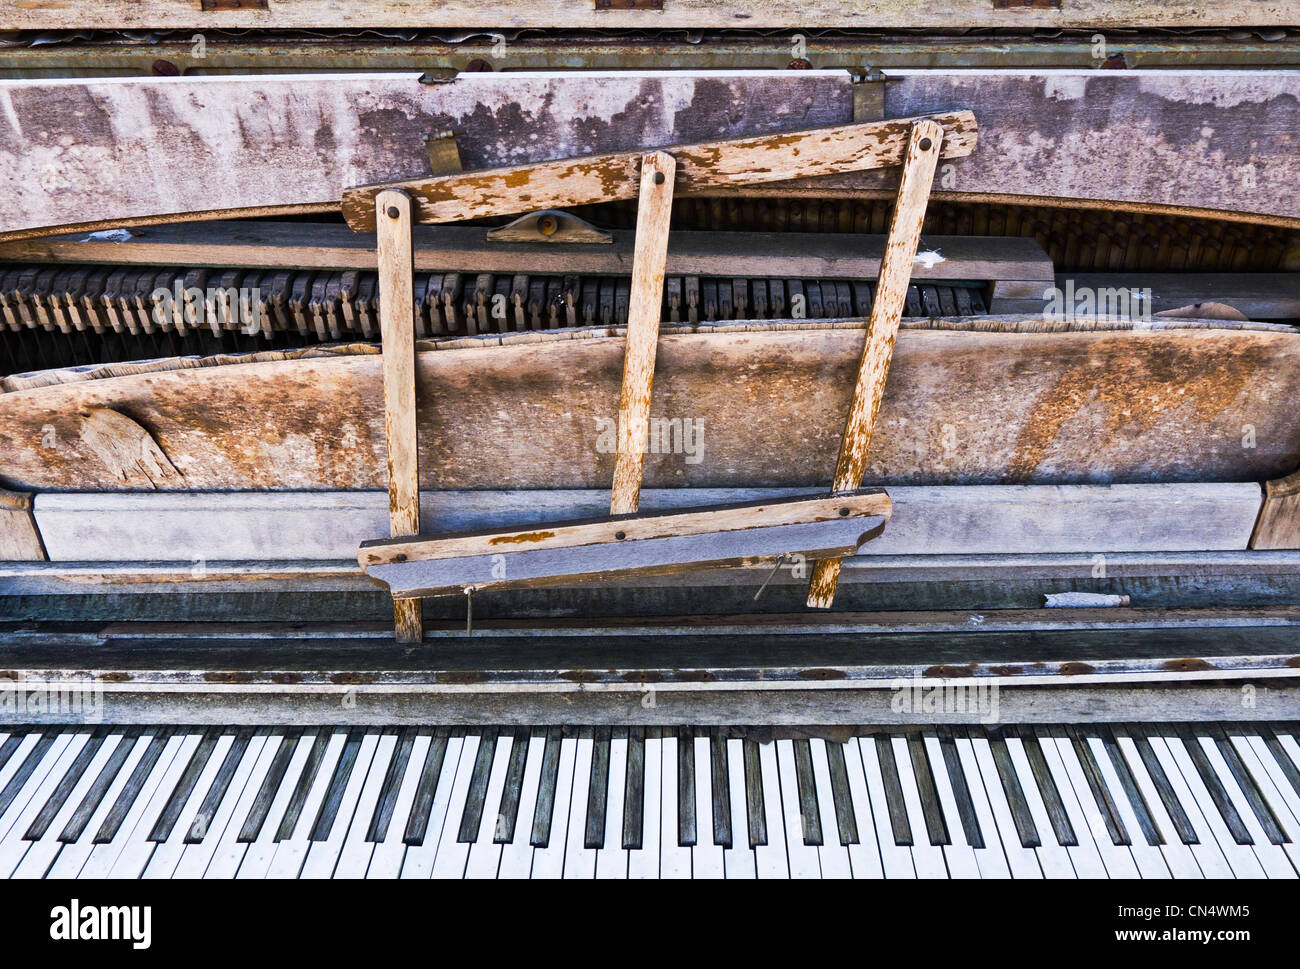 A very dilapidated, broken down upright piano. Stock Photo